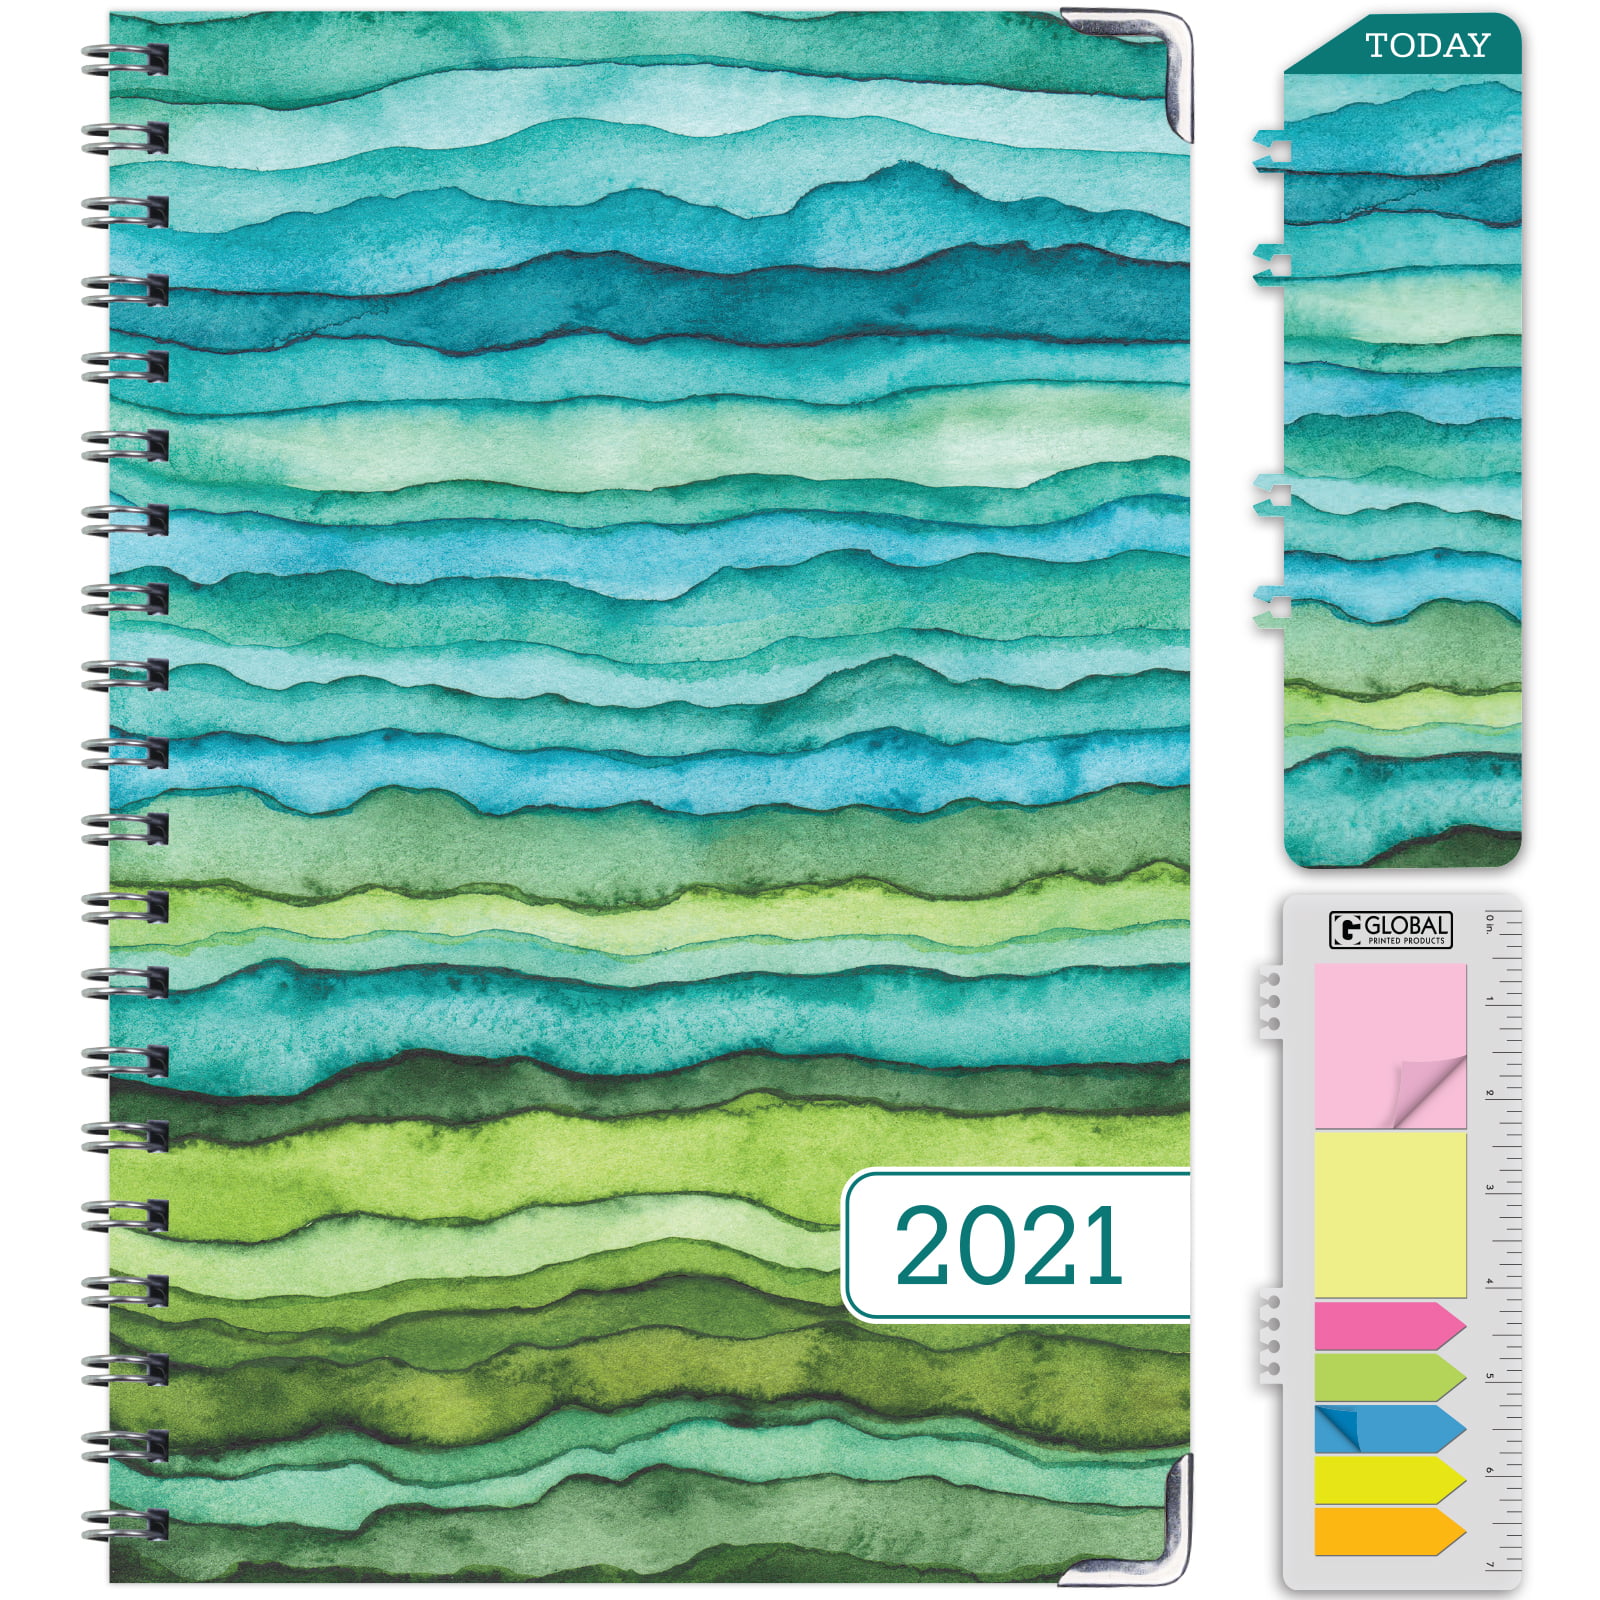 Nov 2020 - Dec 2021 HARDCOVER  2021 Planner Daily Weekly Monthly Planner 